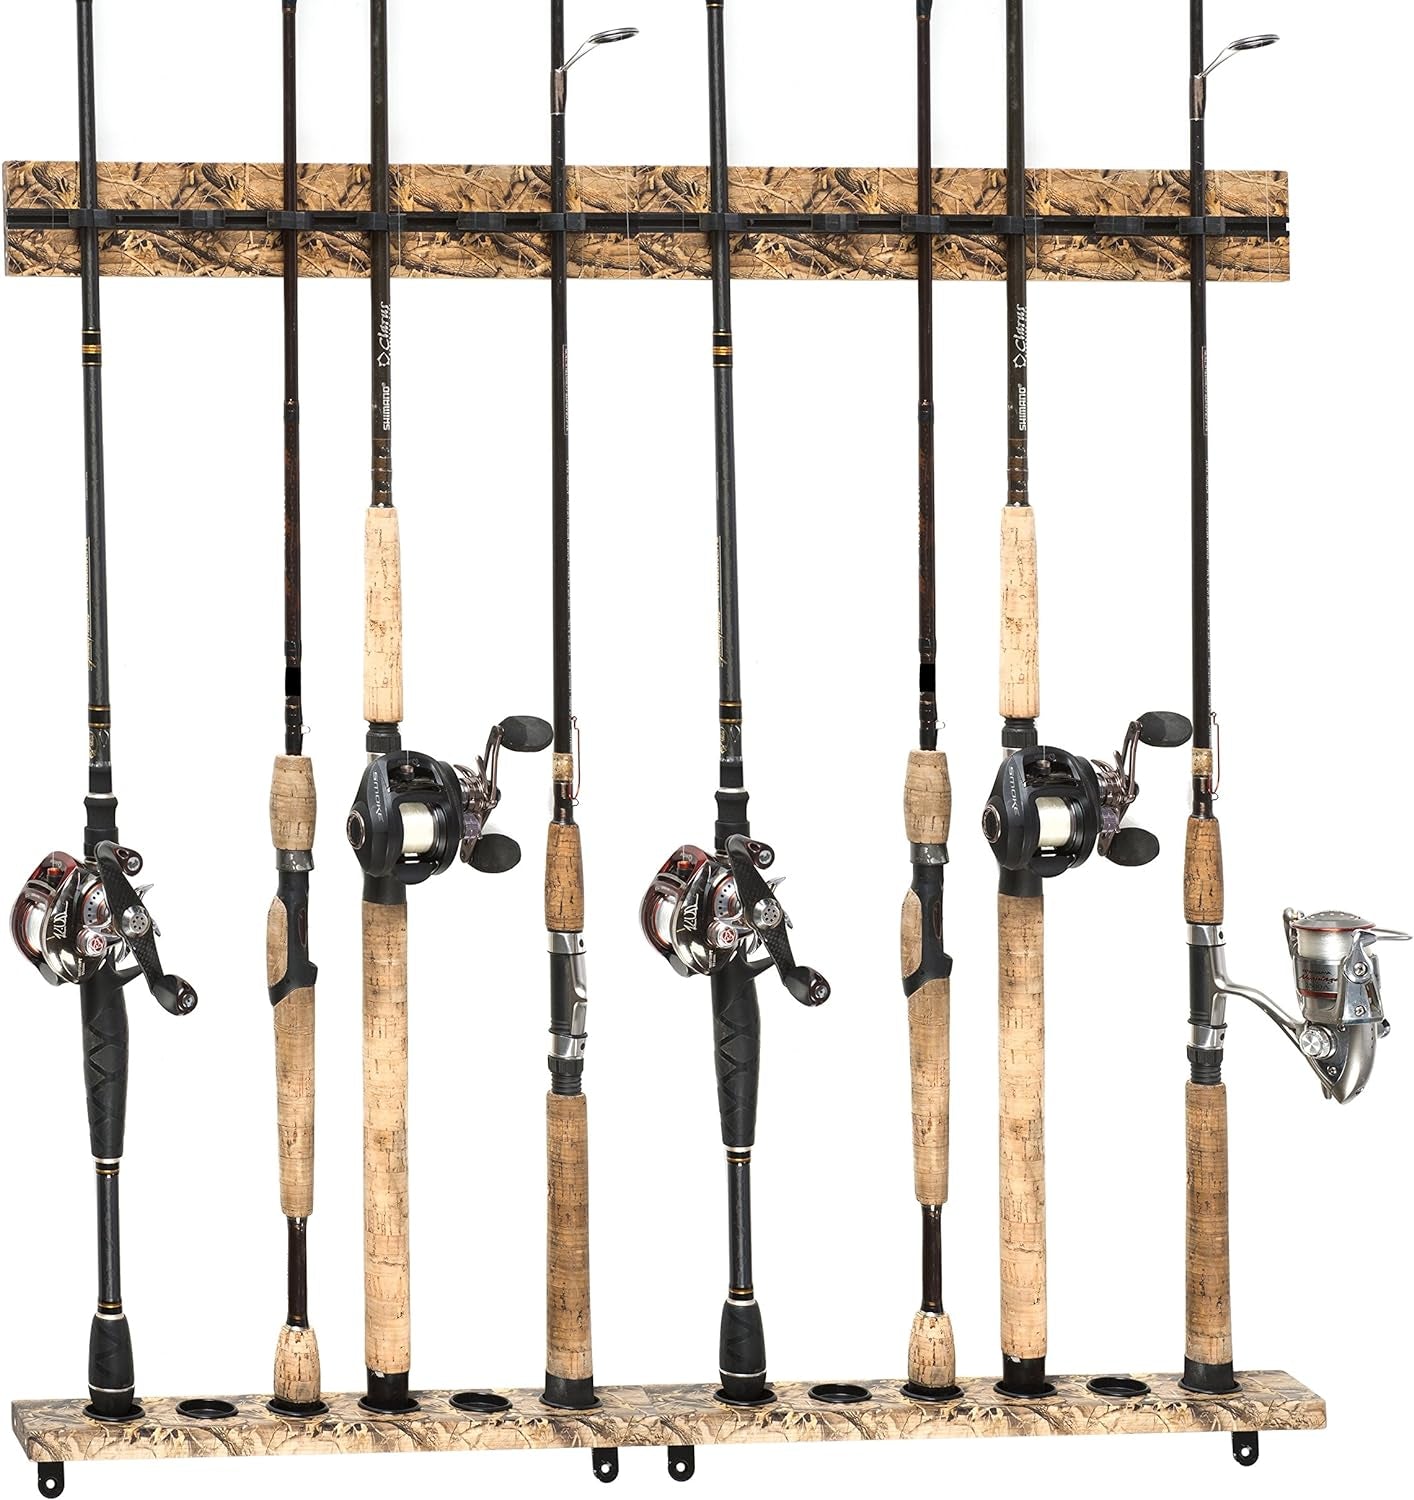 Old Cedar Outfitters Organized Fishing Camo Modular Vertical Wall Rack for Fishing Rod Storage, Holds up to 6 Fishing Rods, Camouflage Finish, CRWR-006